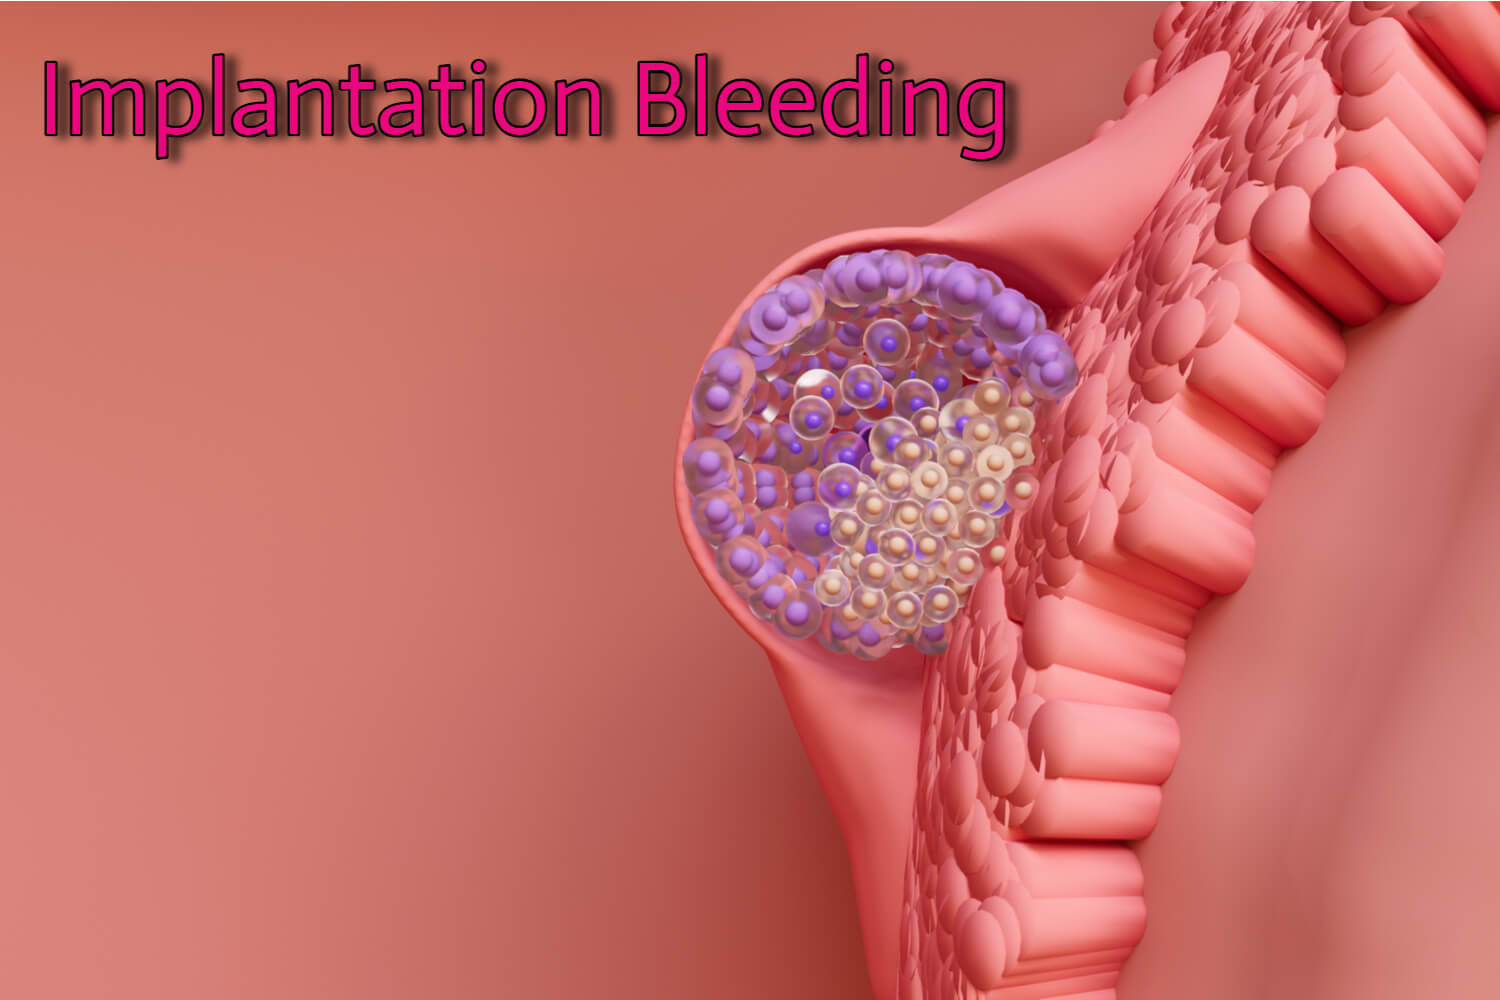 Why Does Implantation Bleeding Happen? - Being The Parent